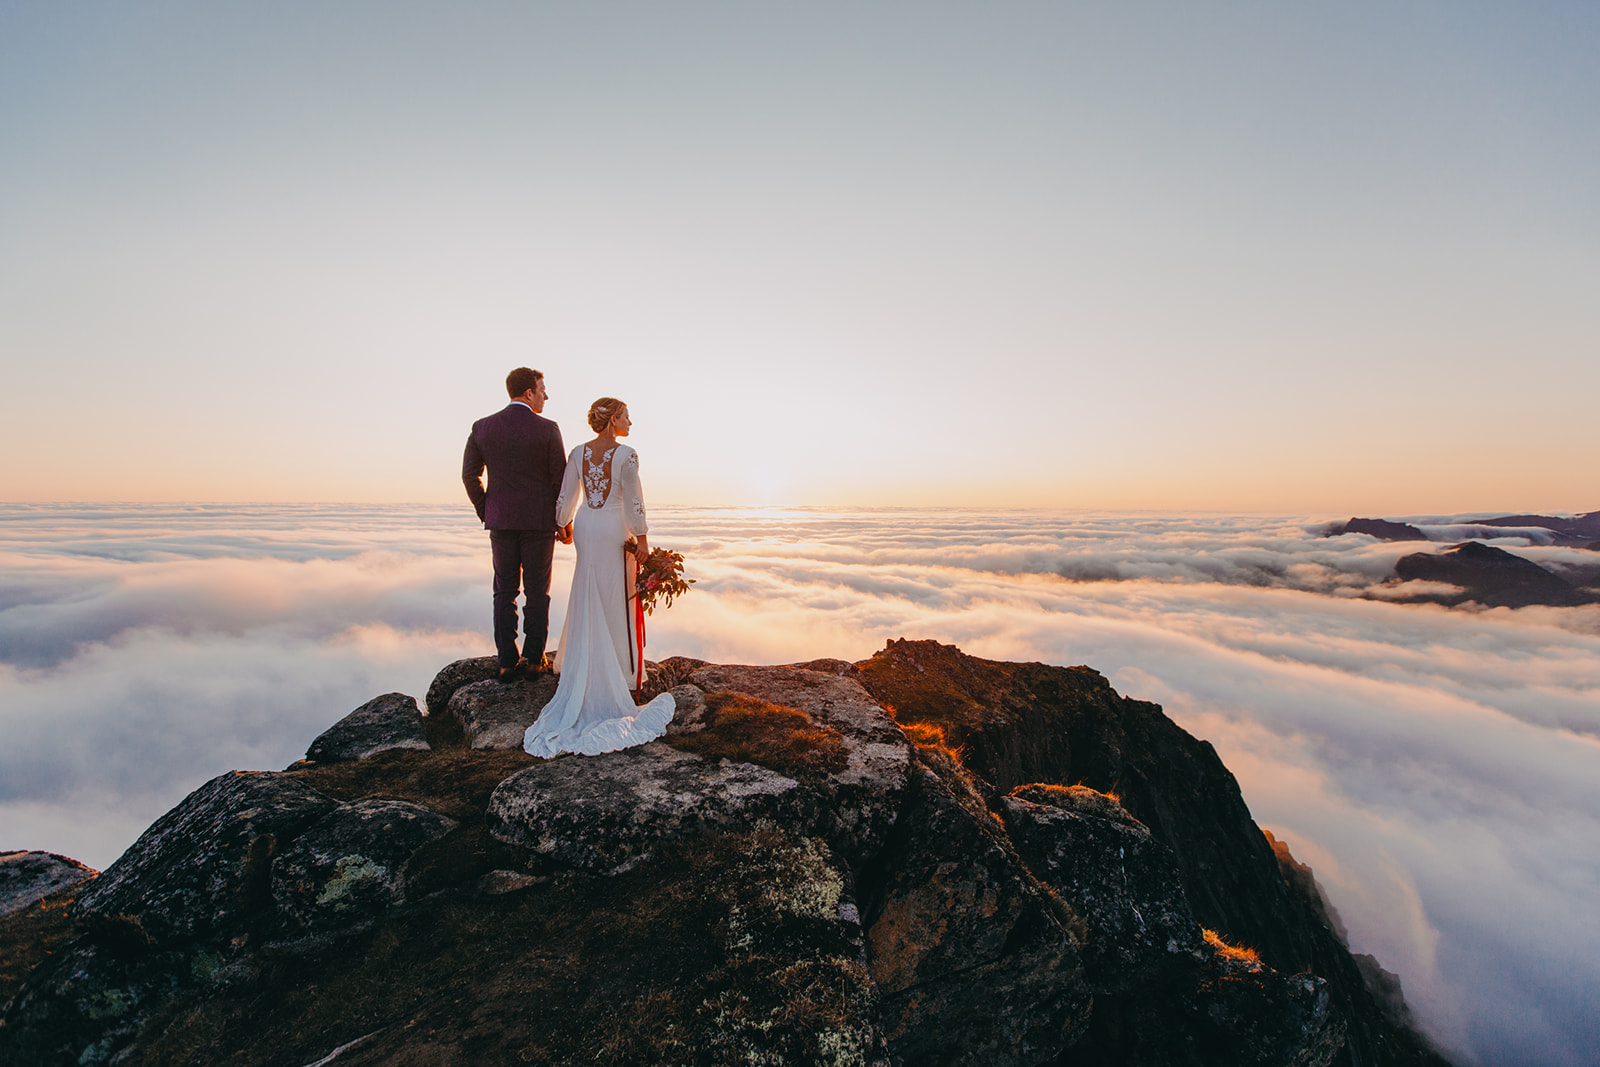 Eloping under the midnight sun. Above the clouds. Lofoten, Norway. By Christin Eide Photography